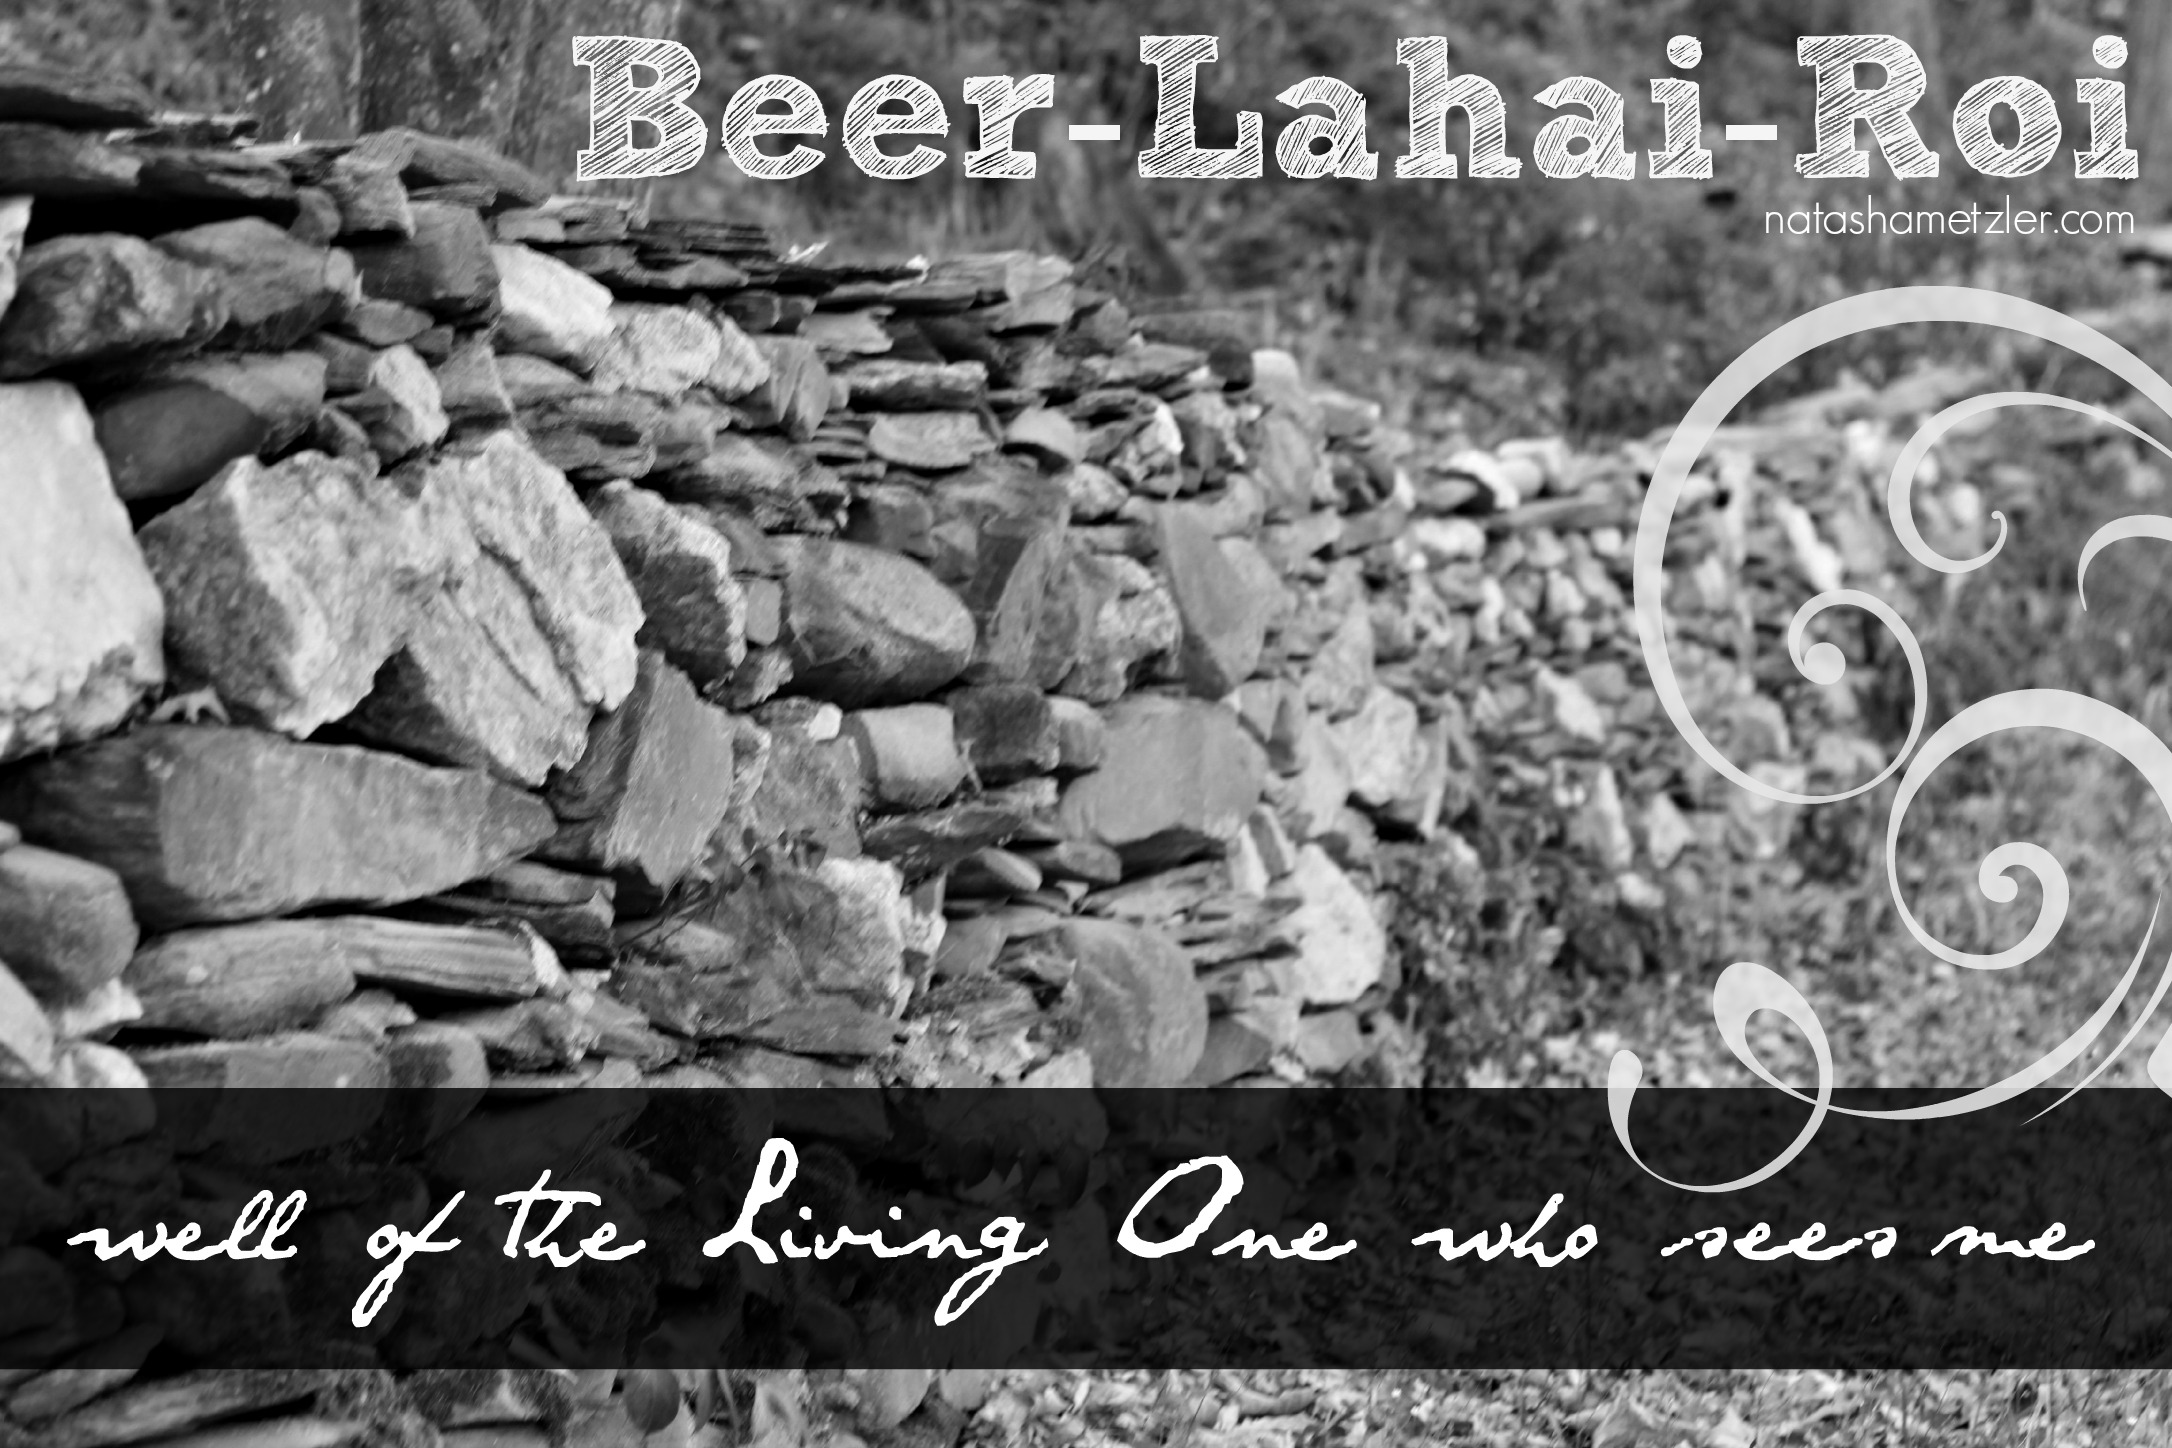 Beer-Lahai-Roi: well of the Living One who sees me